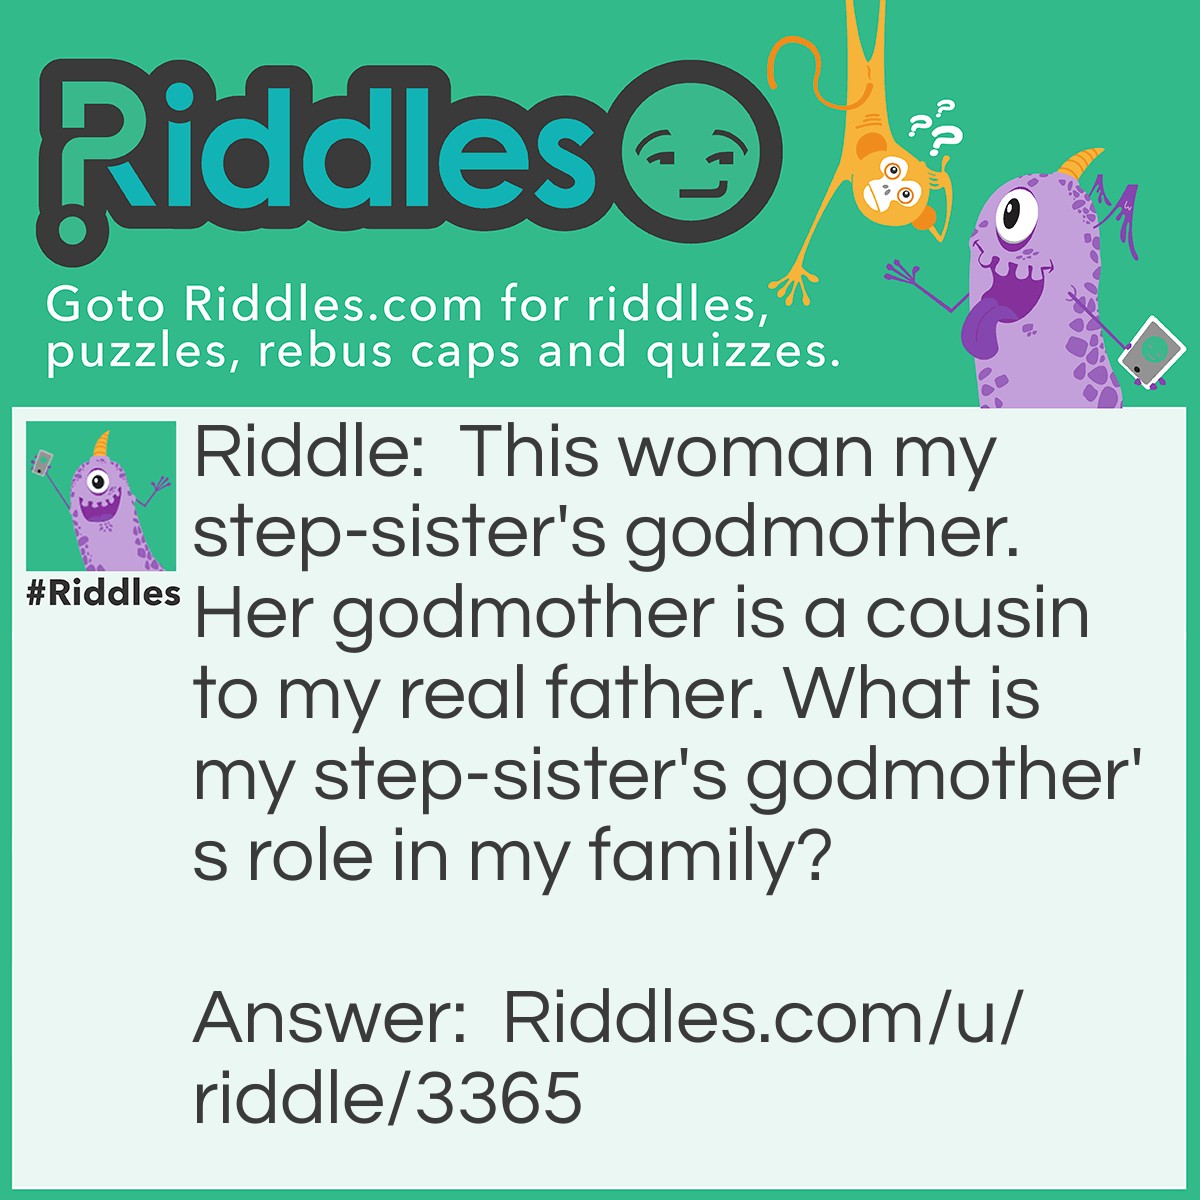 Riddle: This woman my step-sister's godmother. Her godmother is a cousin to my real father. What is my step-sister's godmother's role in my family? Answer: My first cousin once removed.